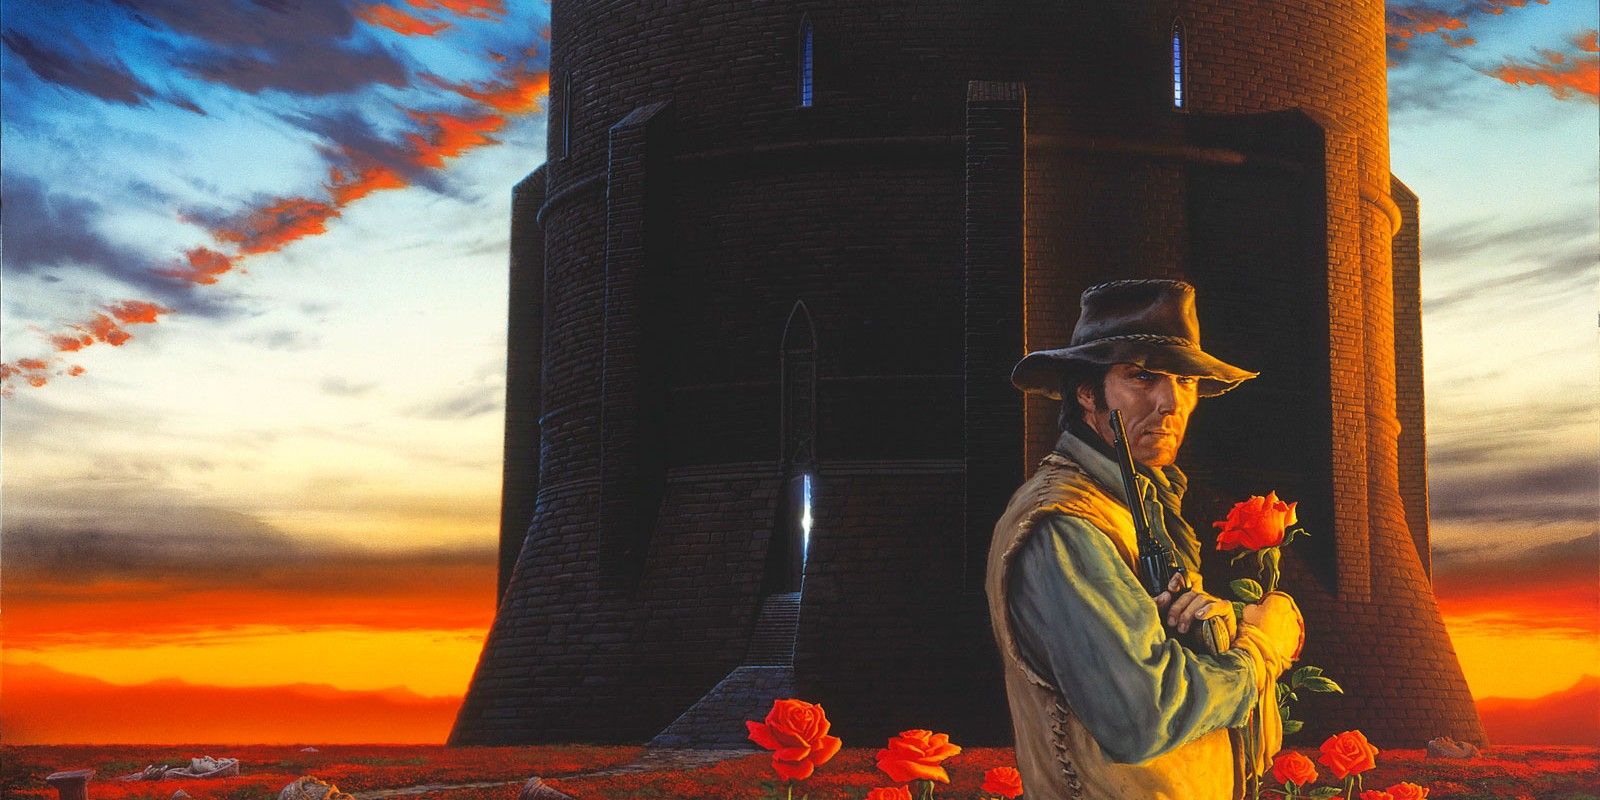 The cover of the Stephen King book The Dark Tower